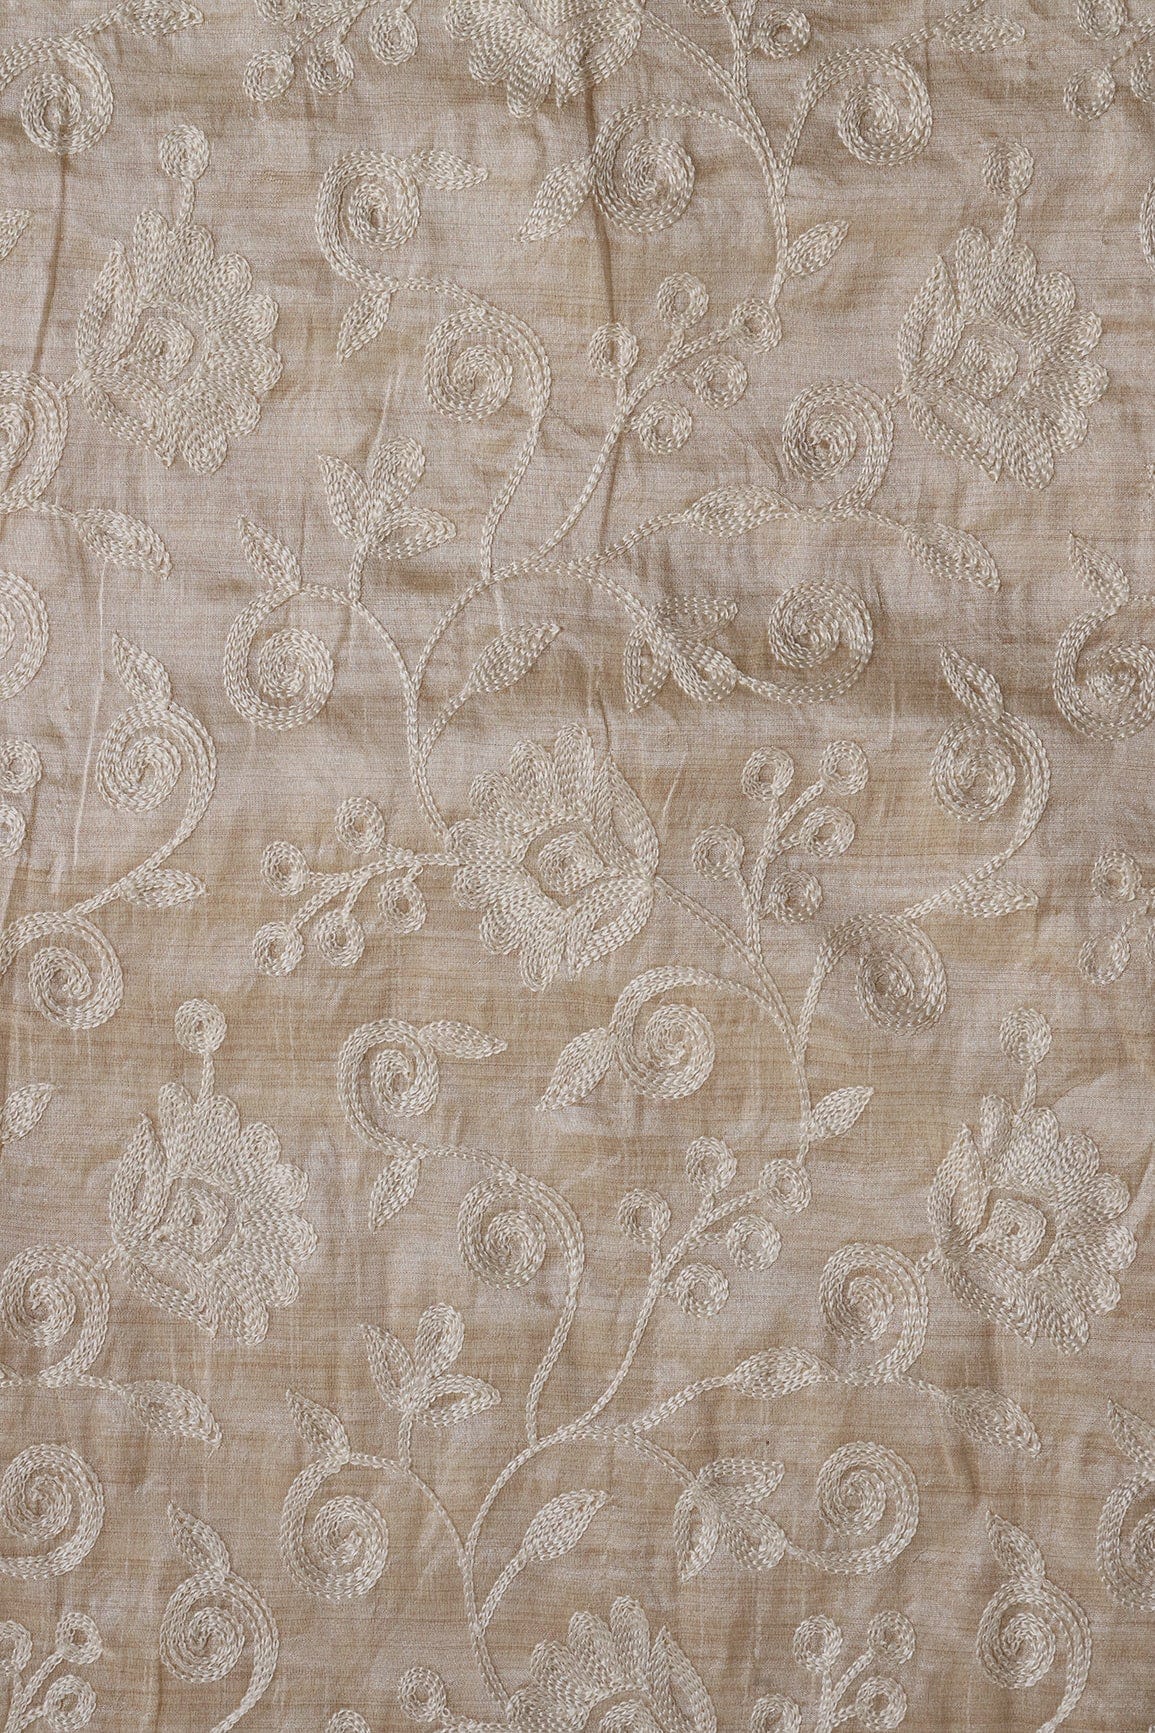 doeraa Embroidery Fabrics Off White Thread Beautiful Heavy Floral Embroidery Work On Beige Mulberry Silk Fabric